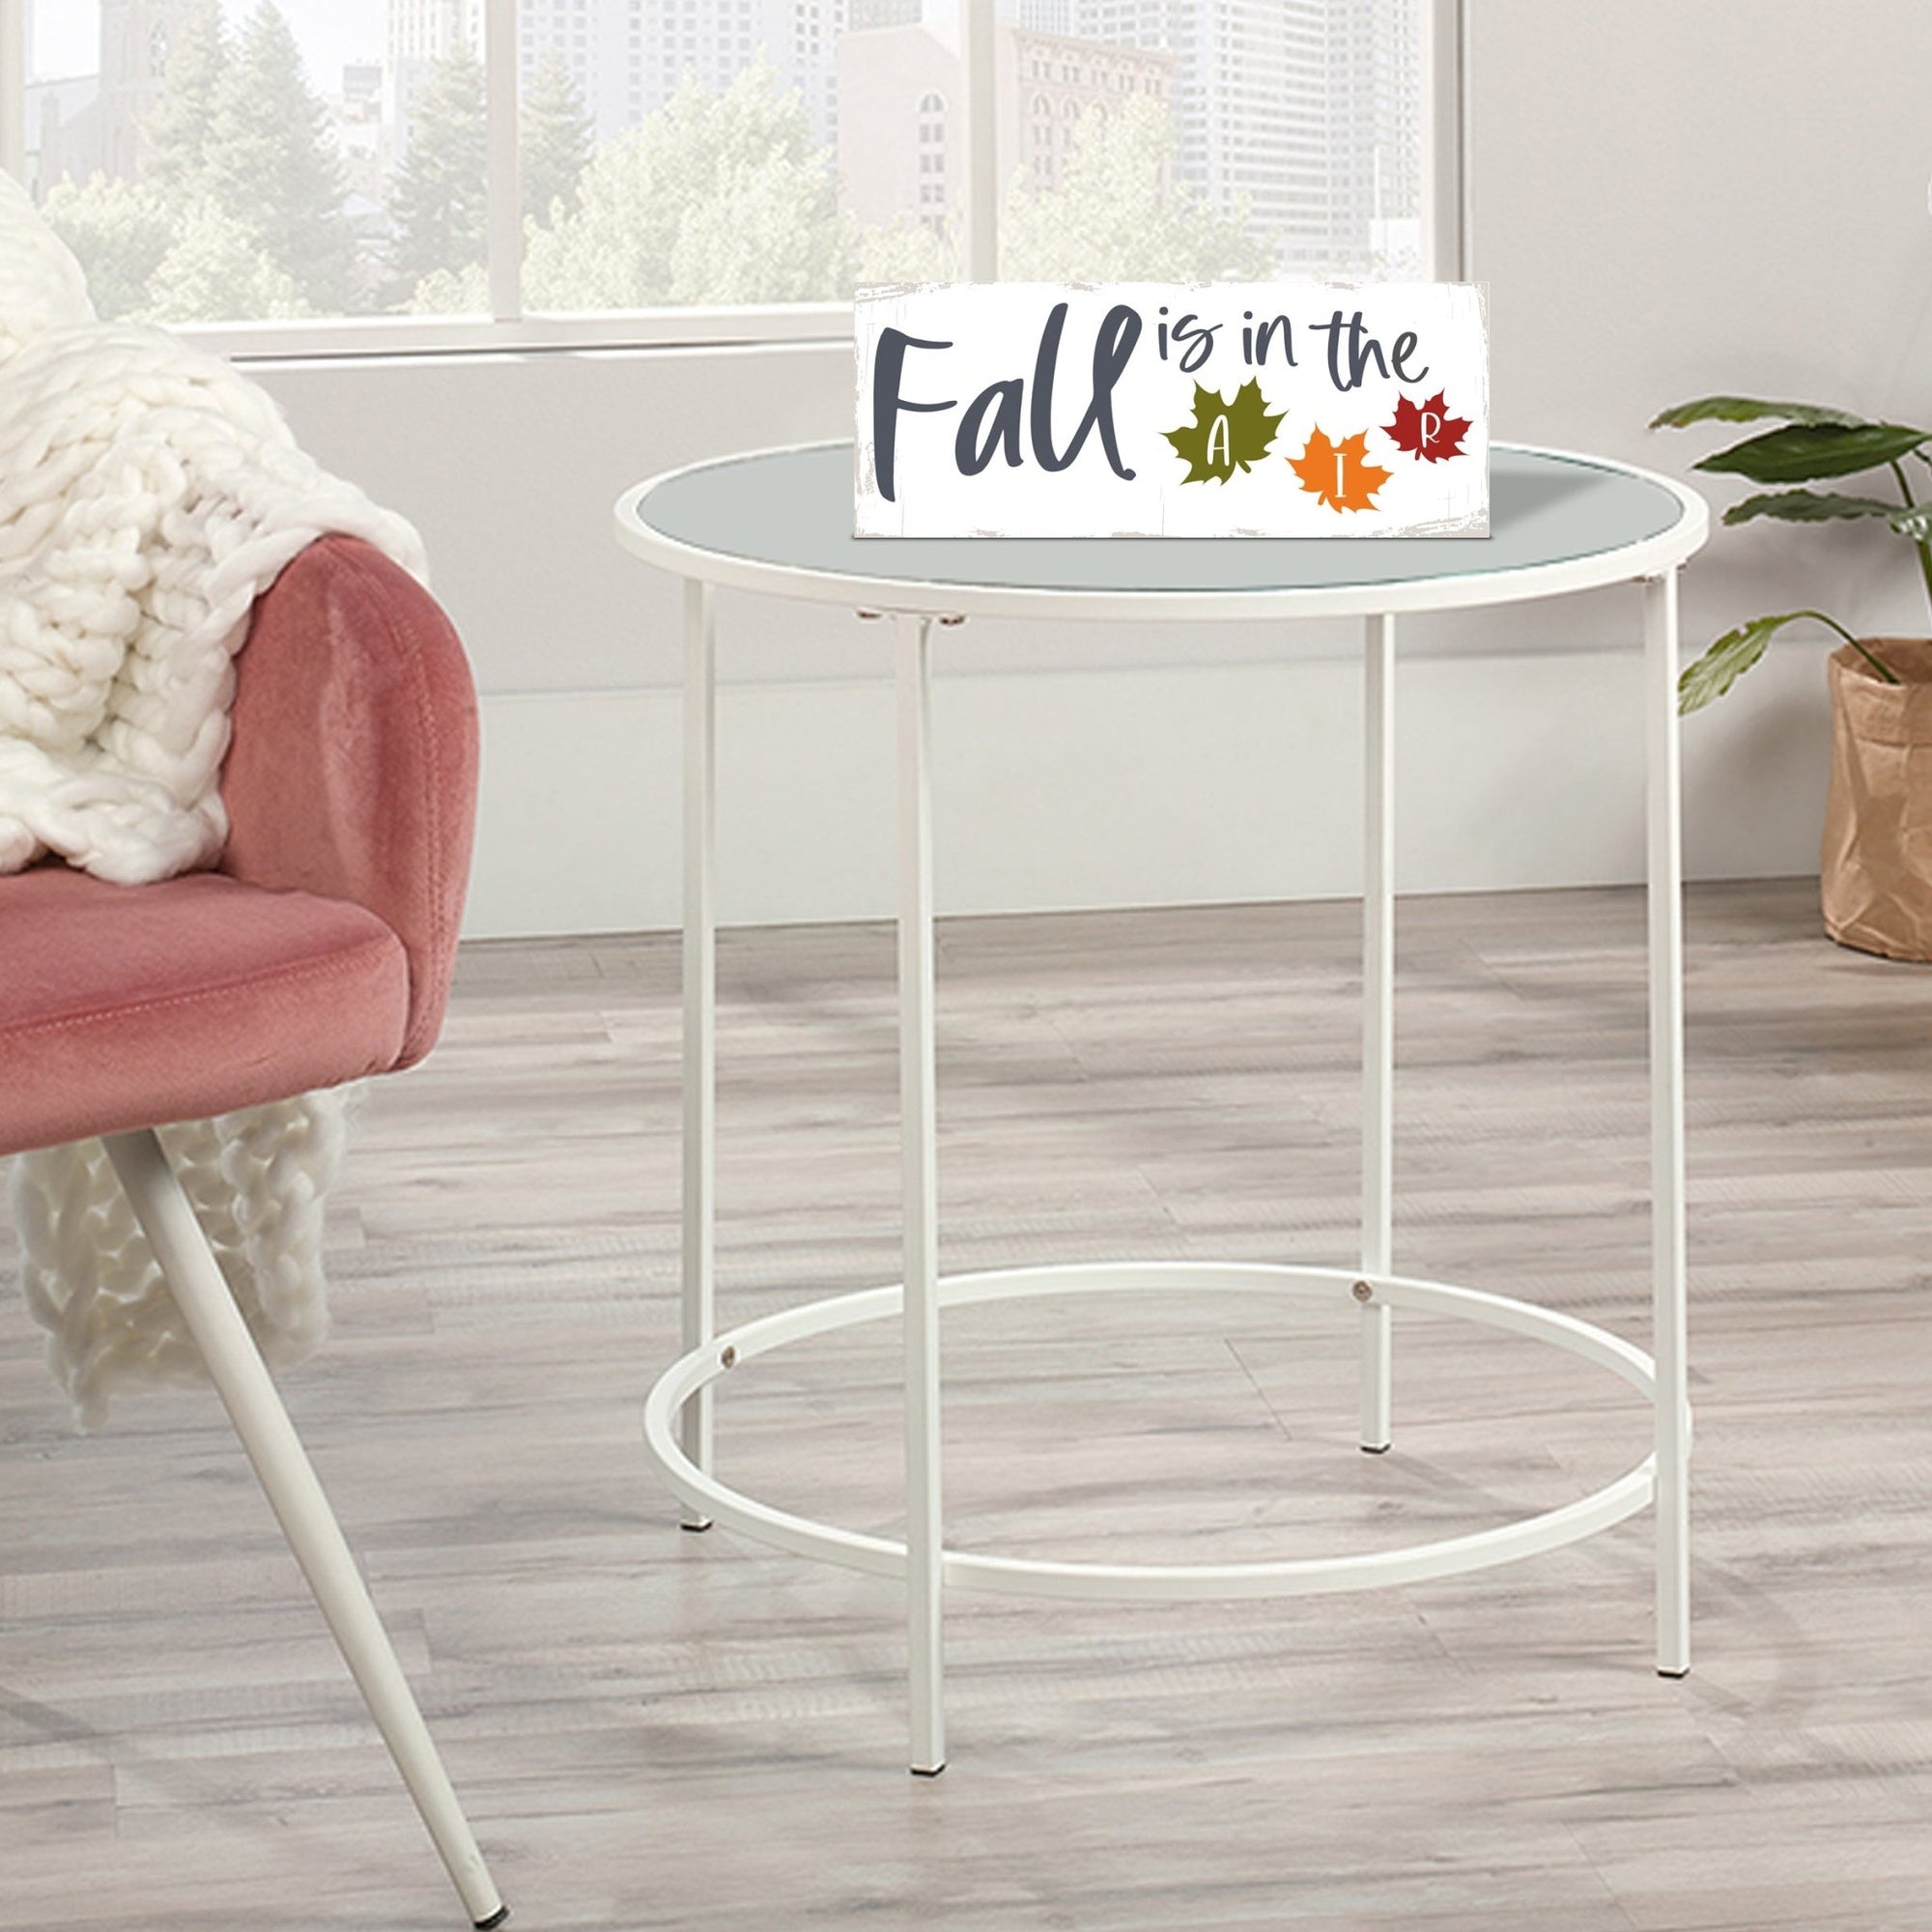 Inspirational Shelf Décor and Tabletop Signs for Fall Season - LifeSong Milestones